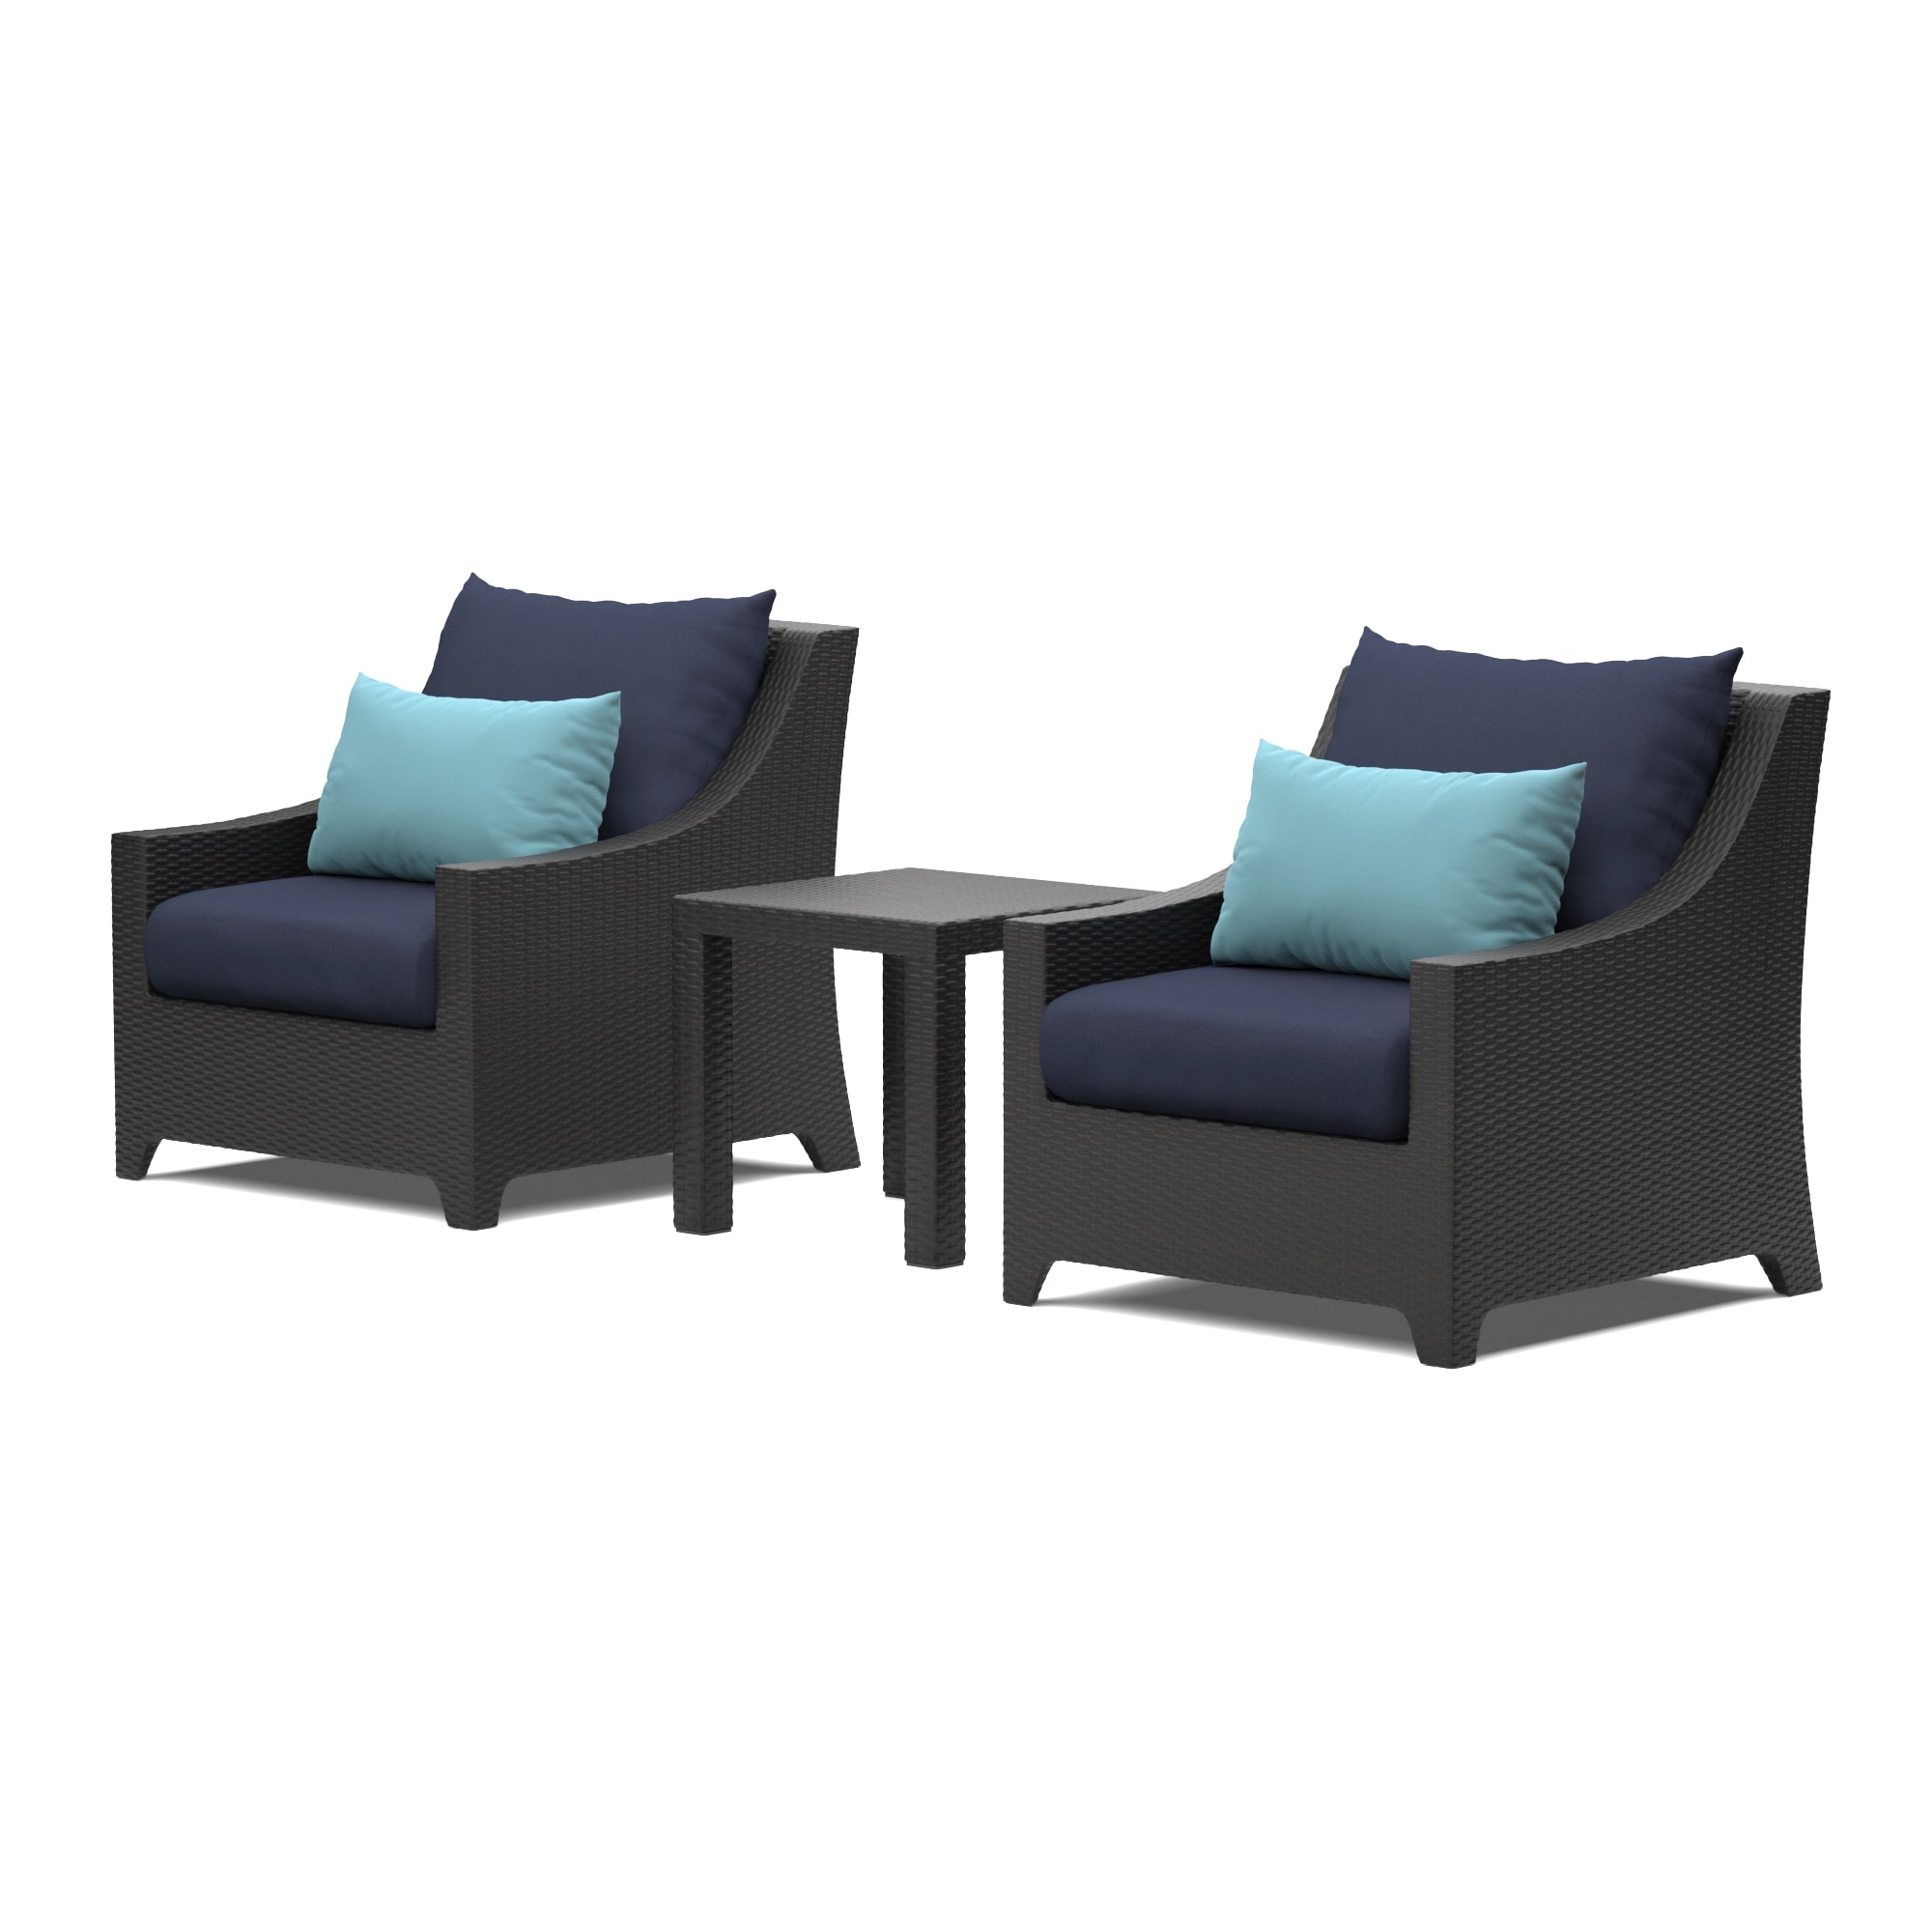 Deco 3 Piece Aluminum Outdoor Patio Club Chairs And Side Table